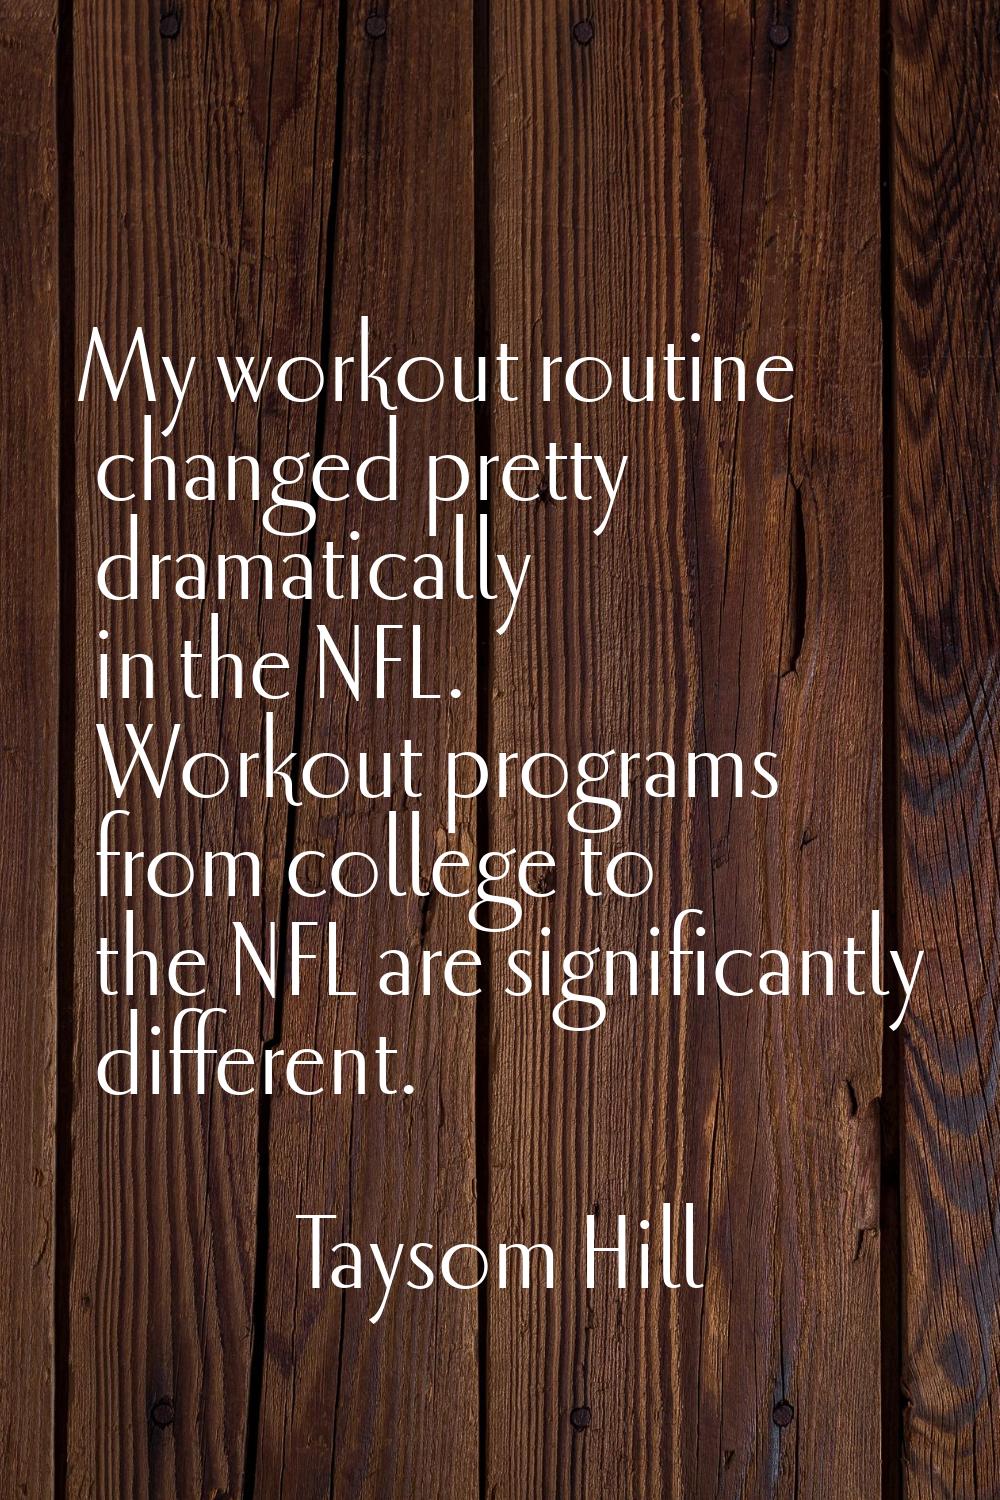 My workout routine changed pretty dramatically in the NFL. Workout programs from college to the NFL